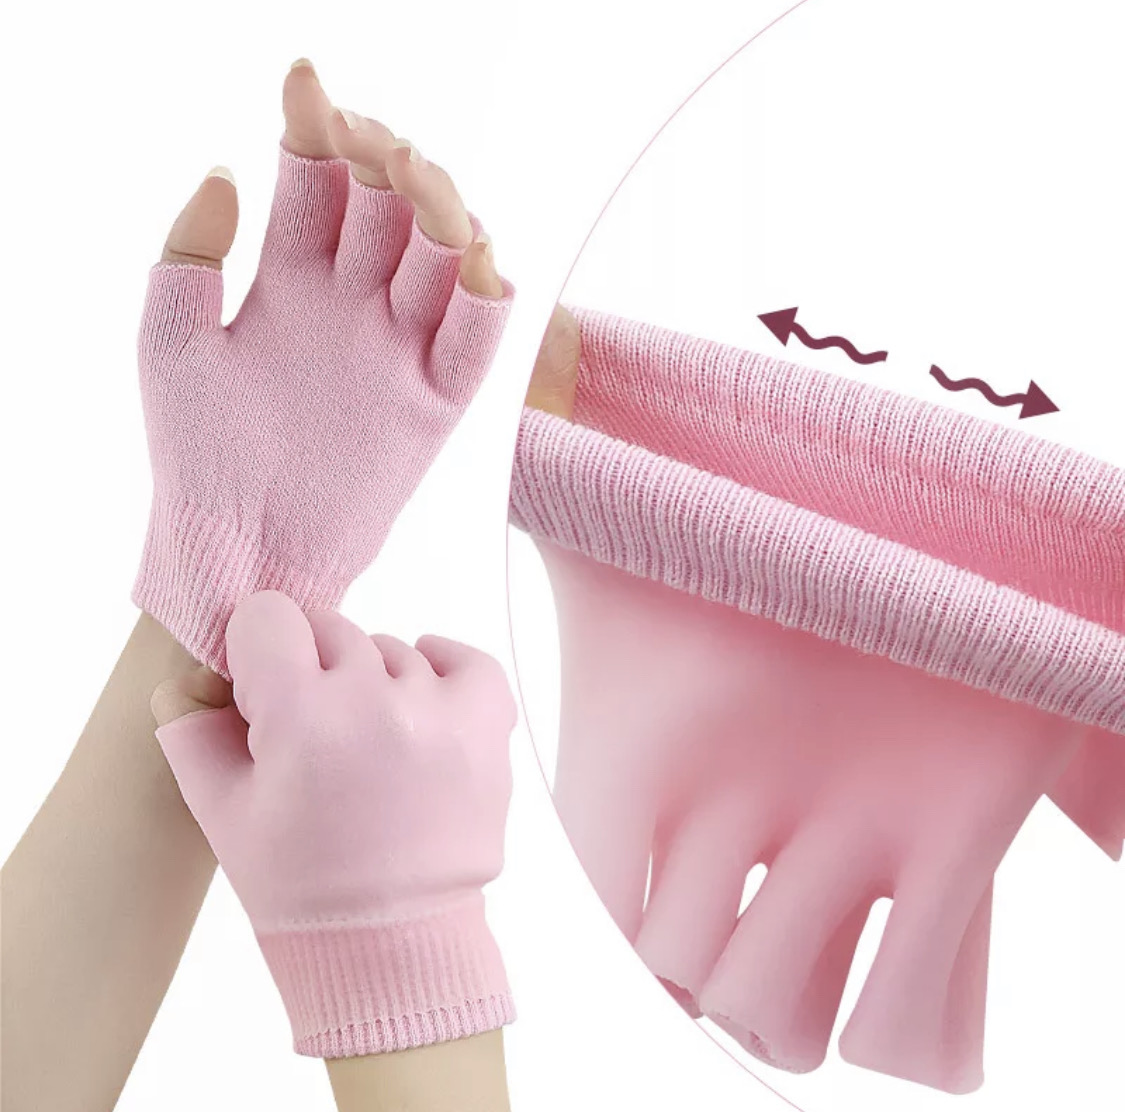 Silicone Gloves, Moisturizing Gloves Overnight 2 Pairs Non-Slip Palm  Elastic Lotion Gloves Size Waterproof Gloves for Dry Hands Chapped Skin